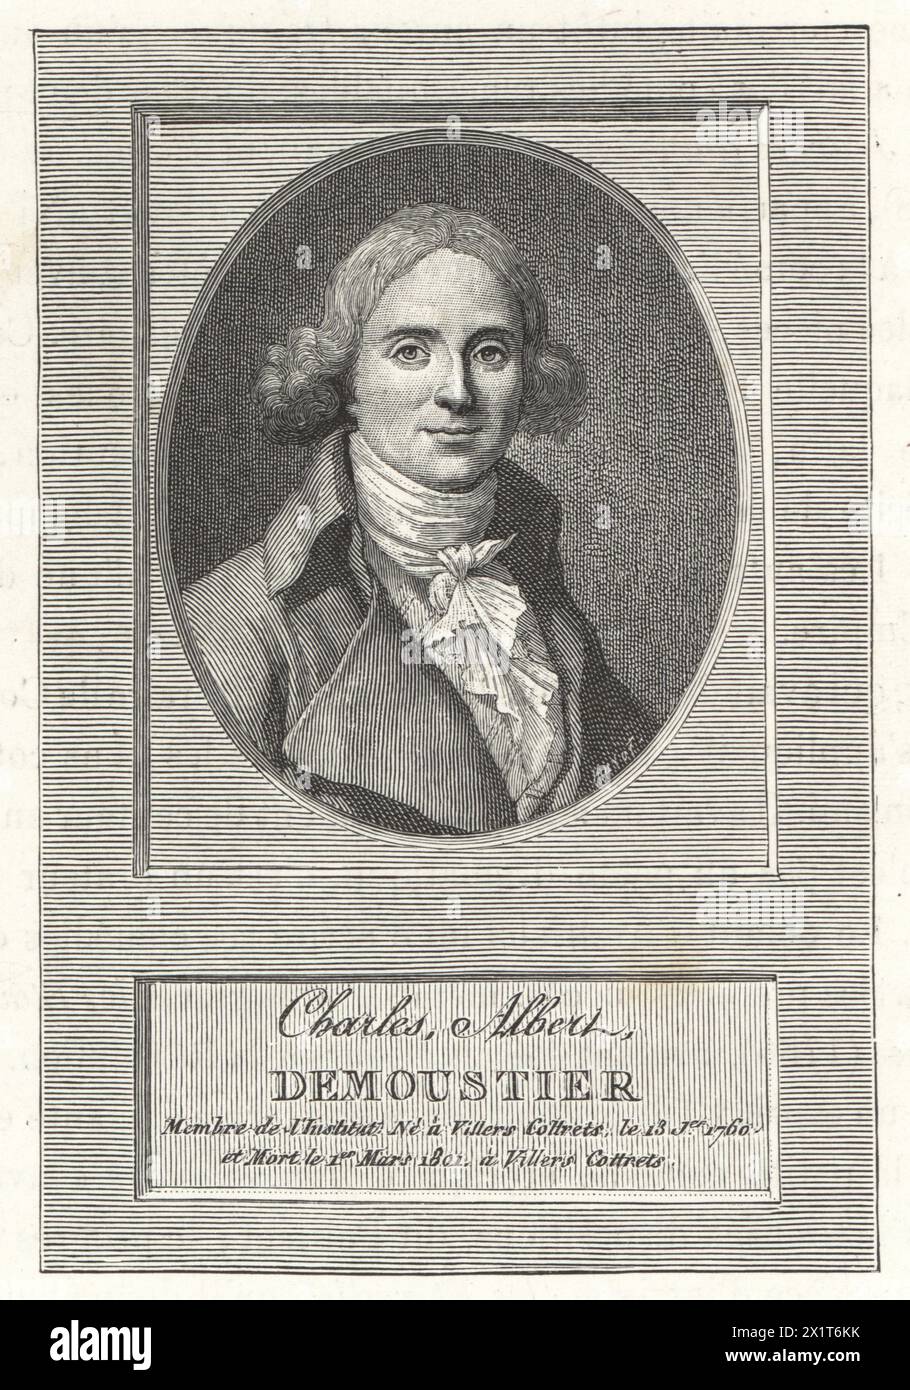 Charles-Albert Demoustier, French writer and playwright, member of the French Institute, 1760-1801. Engraved by Alex Tardieu after a portrait by Pajou fils (Augustin-Désiré Pajou) from Paul Lacroix's Directoire, Consulat et Empire, (Directory, Consulate and Empire), Paris, 1884. Stock Photo